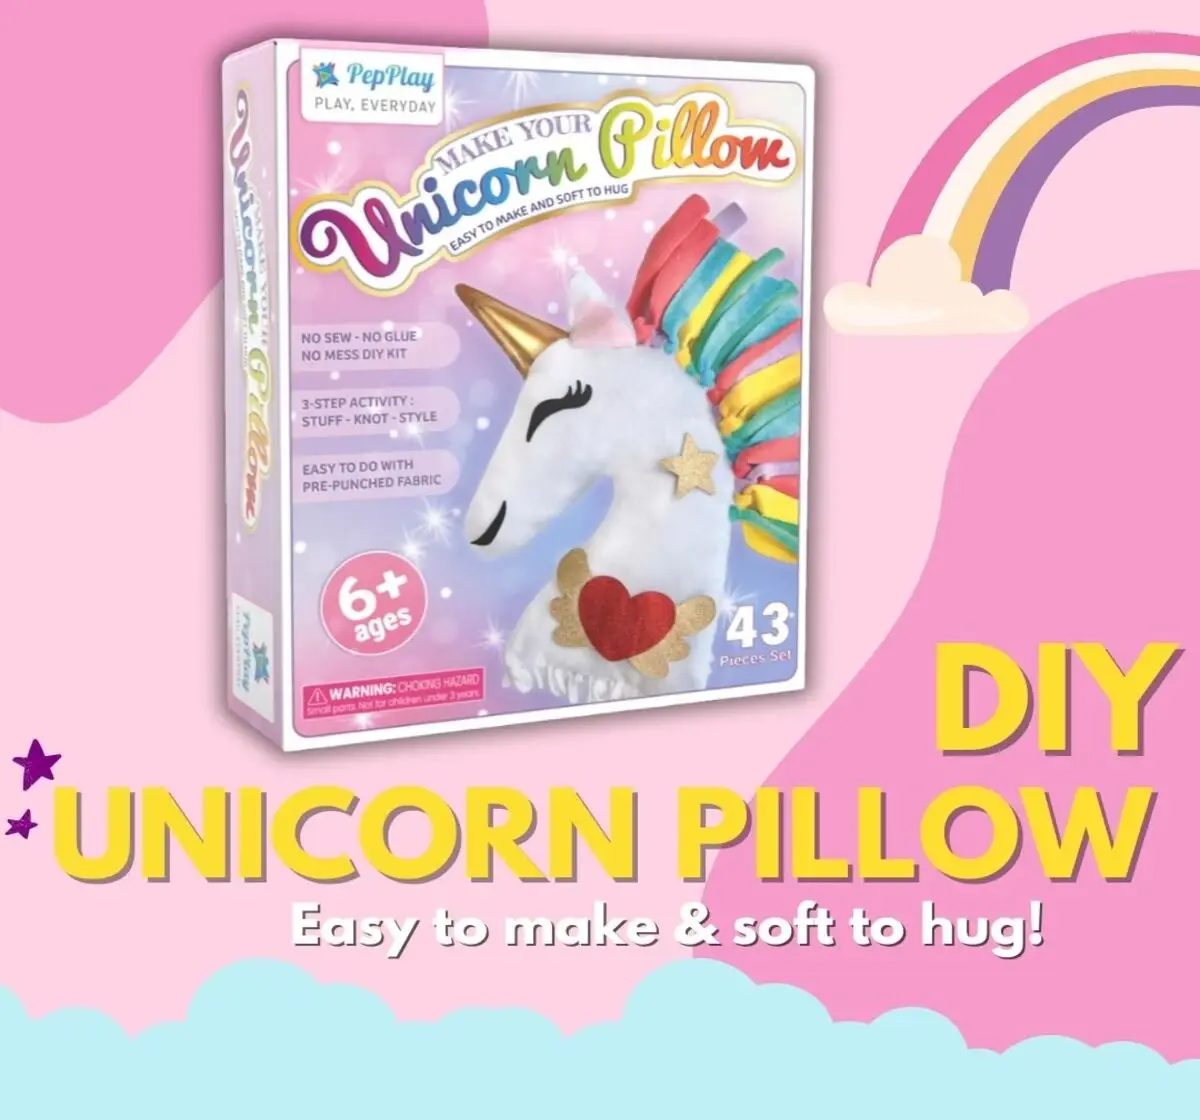 PepPlay Make Your Unicorn Pillow DIY Crafts Kit For Kids of Age 6Y+, Multicolour